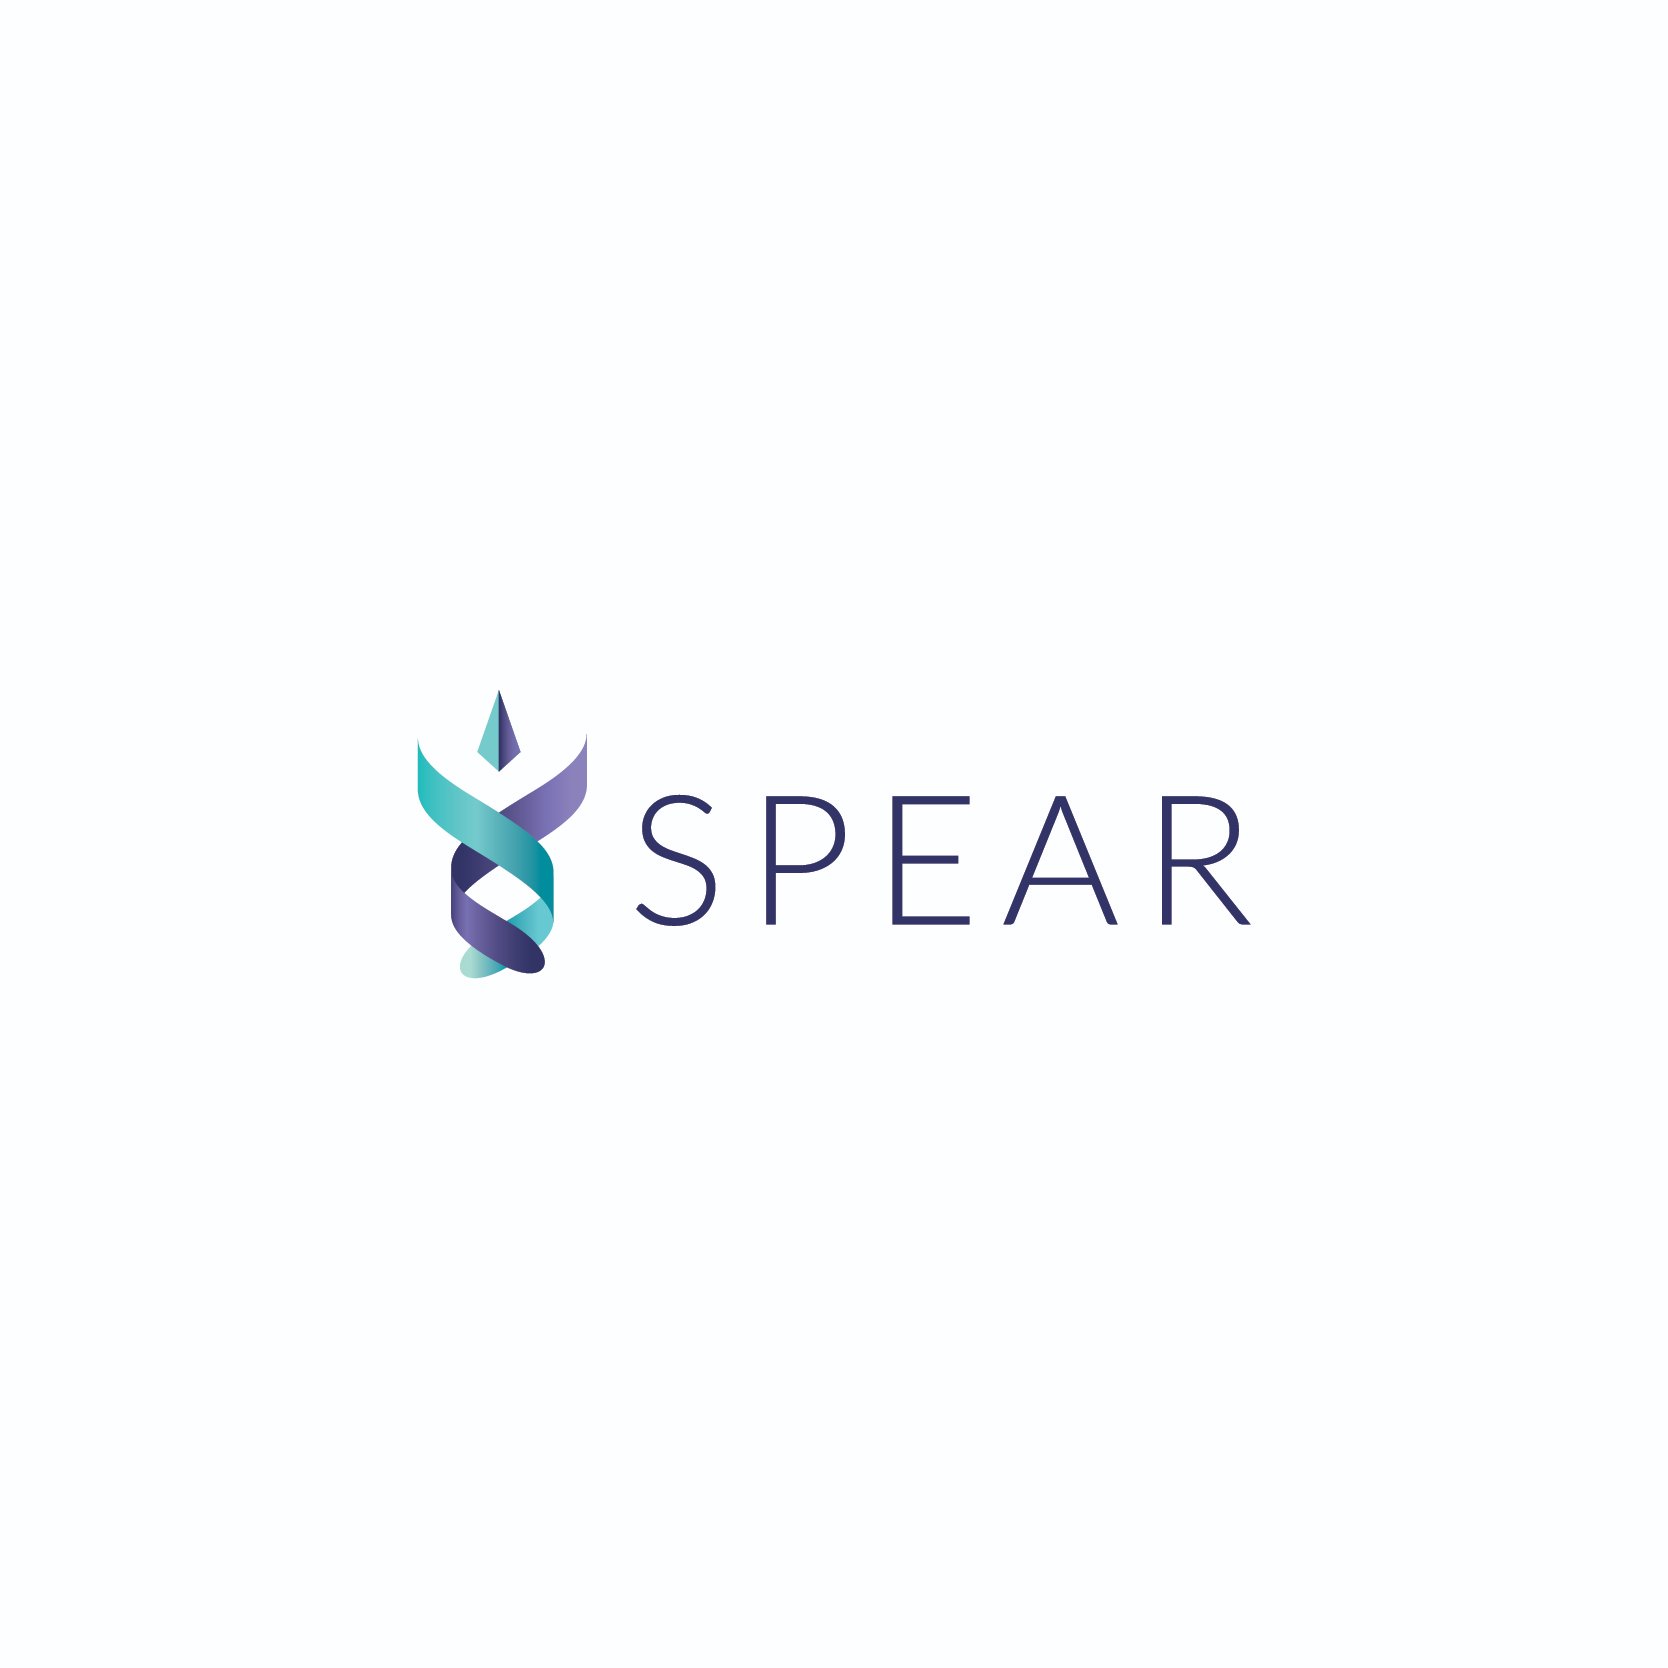 SPEAR project